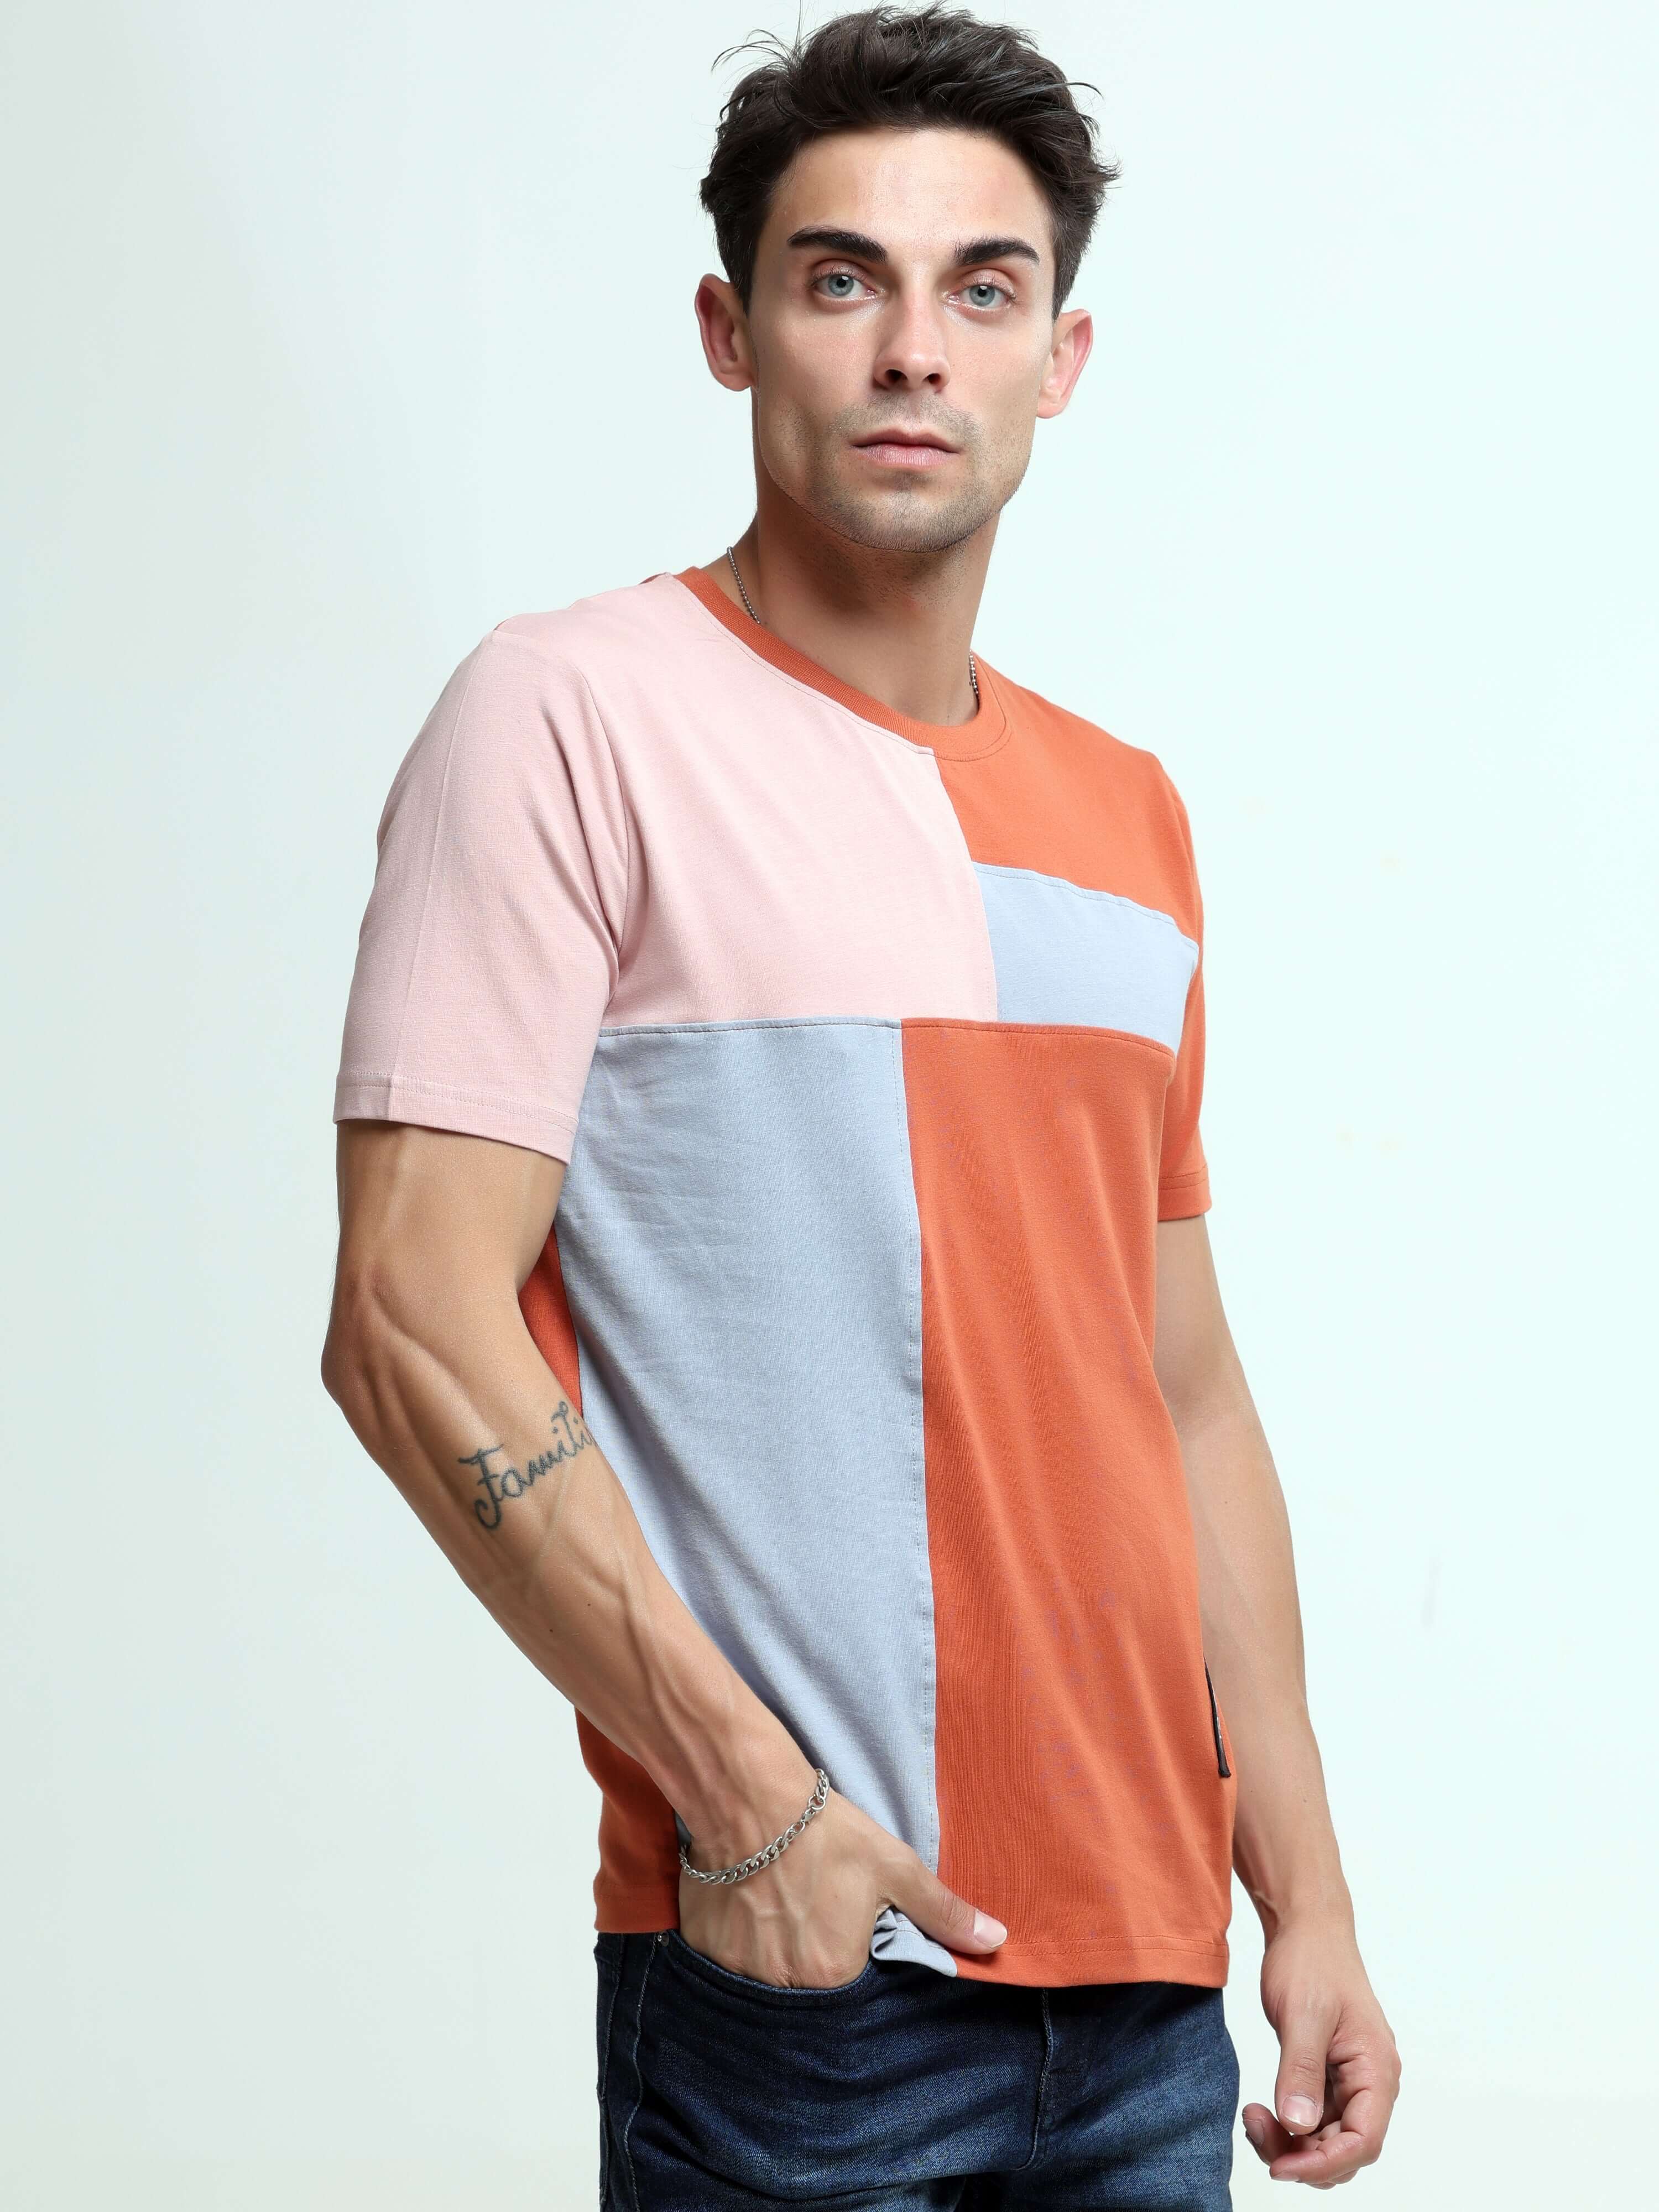 Blitz tangy orange light weight tshirt shop online at Estilocus. This relax-fit Cut and Sew T-shirt is comfortable and the perfect essential all year round. Pair it with white jeans and sneakers and layer it up with a denim jacket for a casual and put-tog